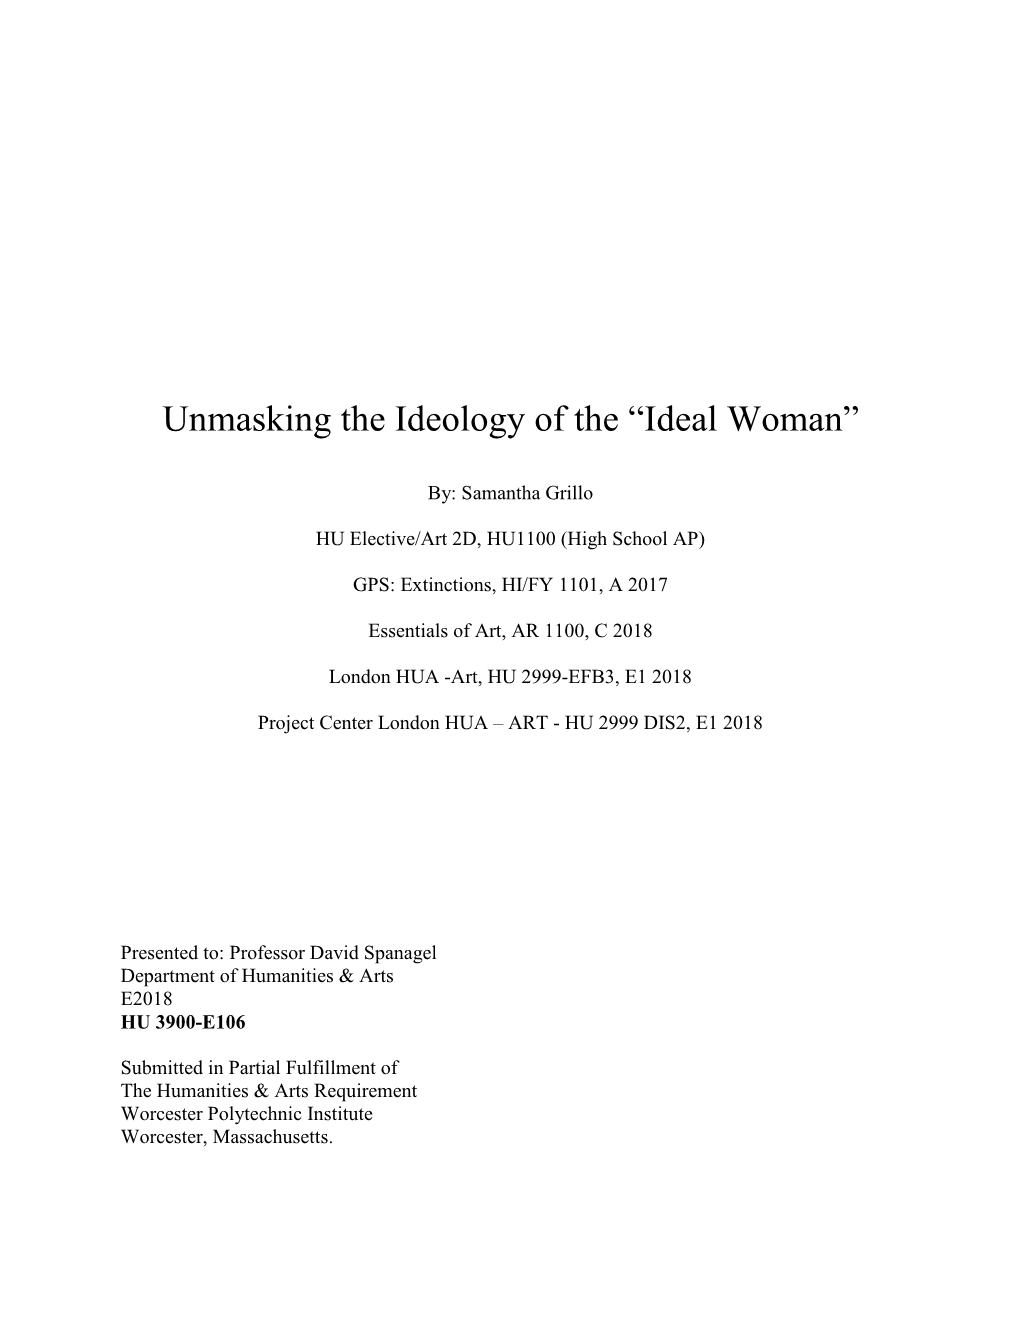 Unmasking the Ideology of the “Ideal Woman”